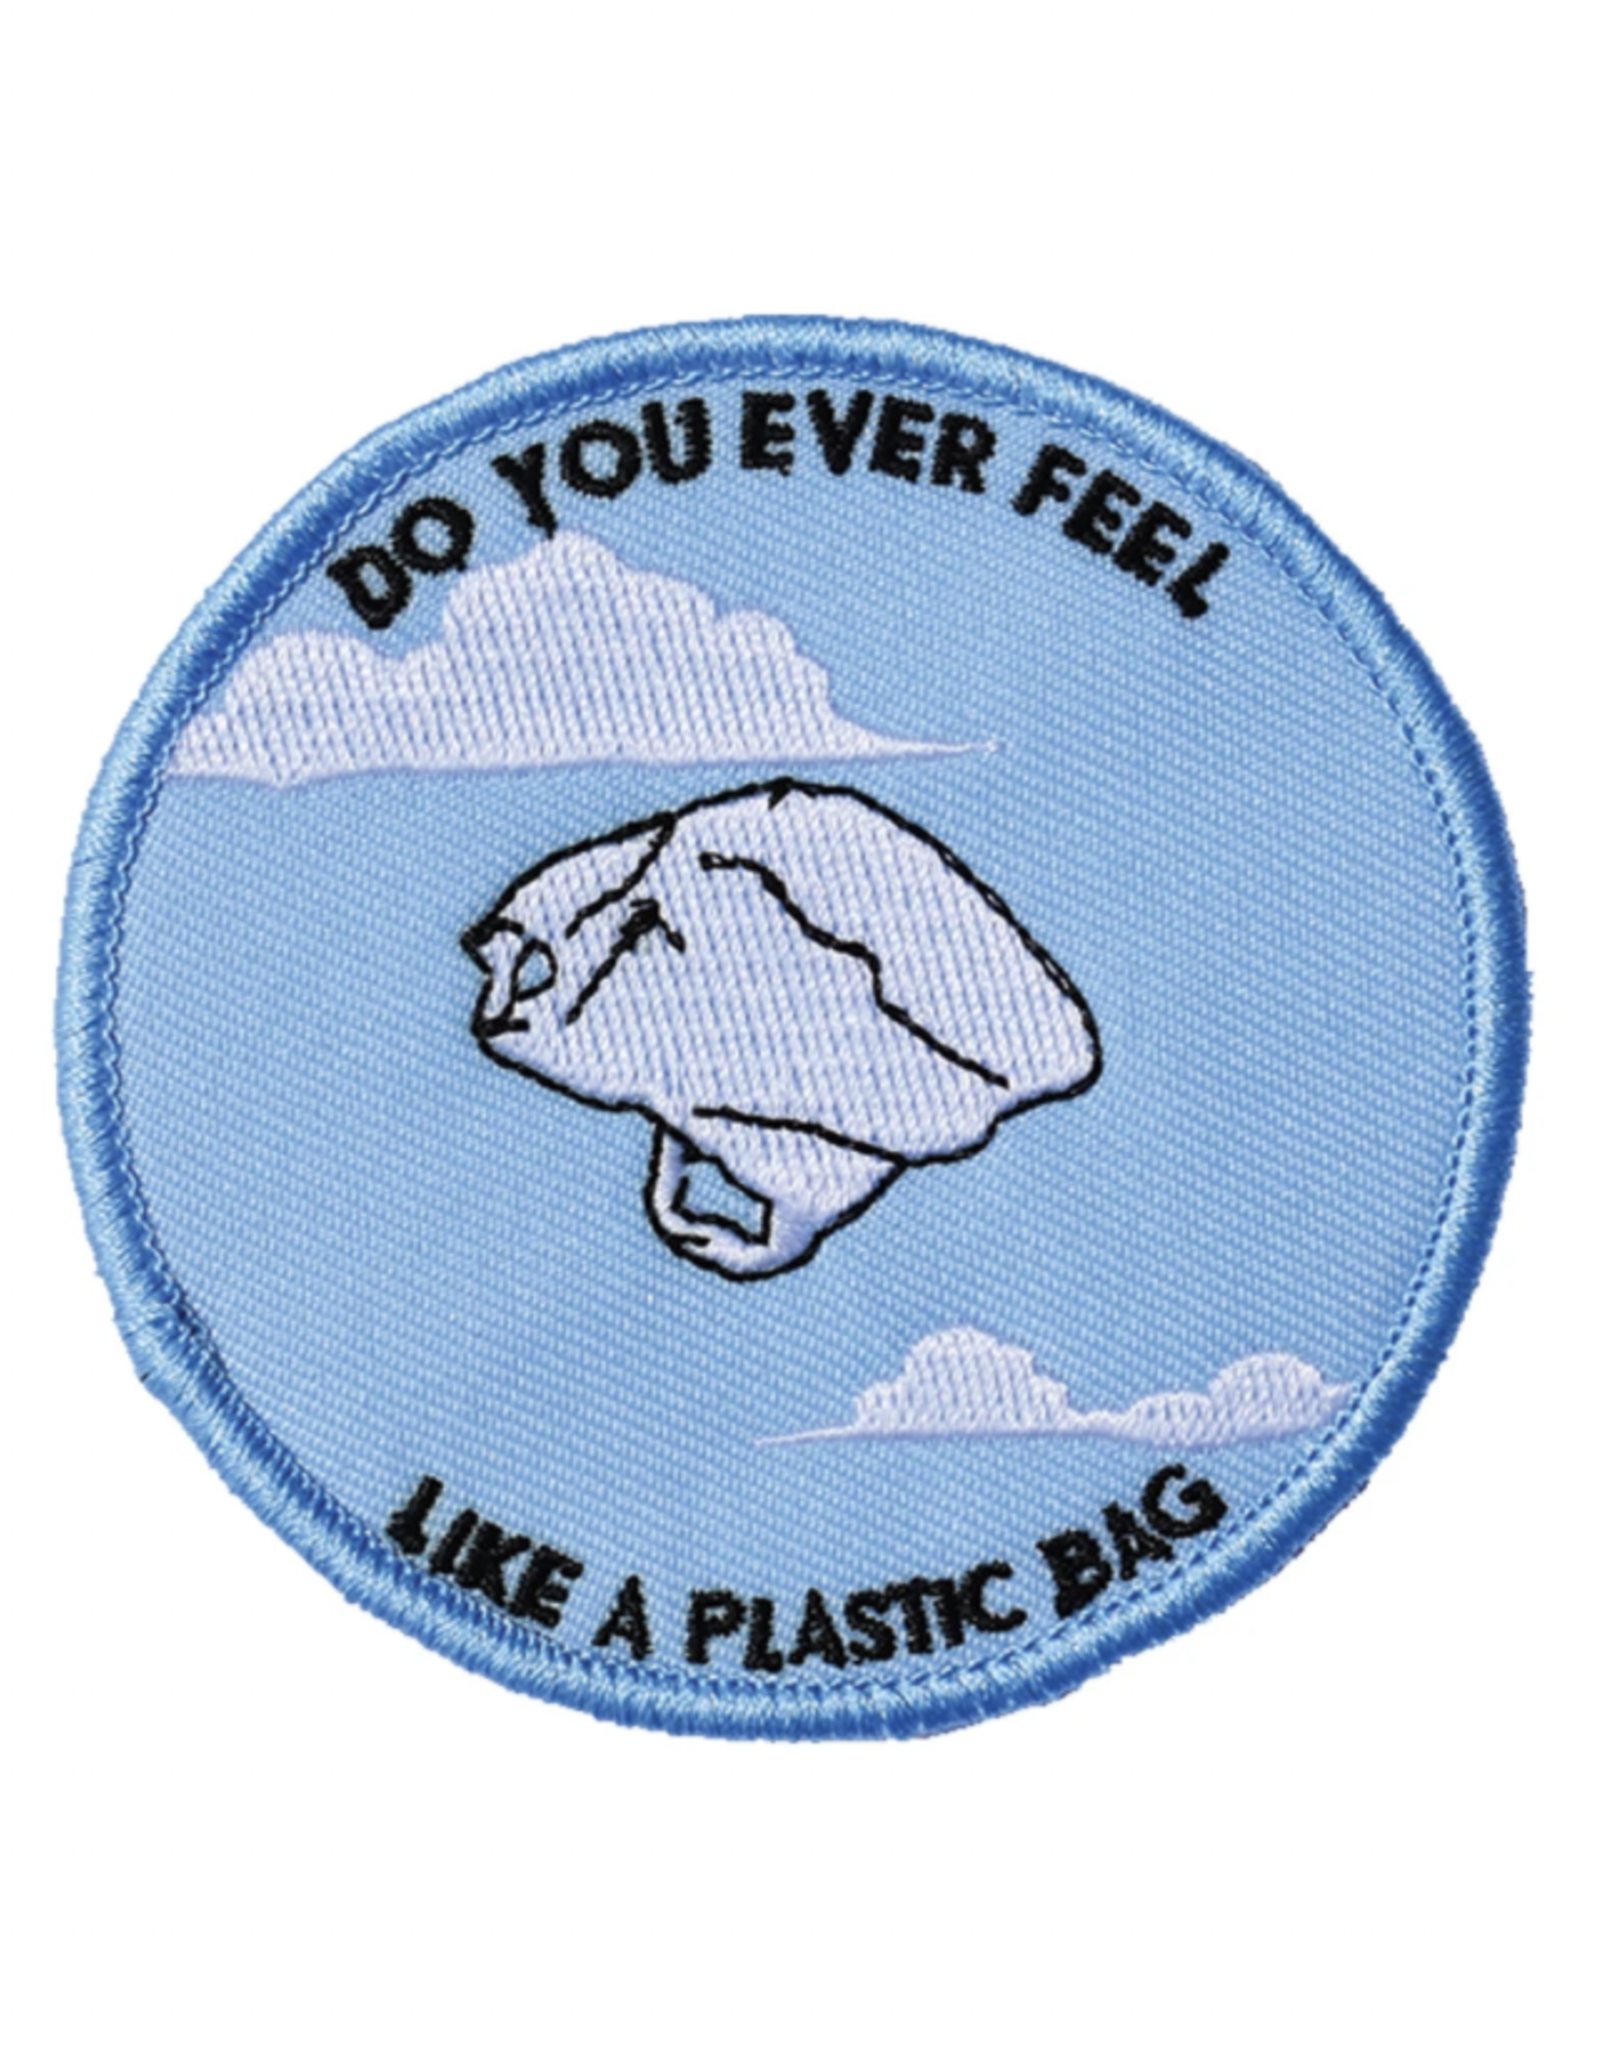 Plastic Bag Embroidered Patch by Retrograde Supply Co